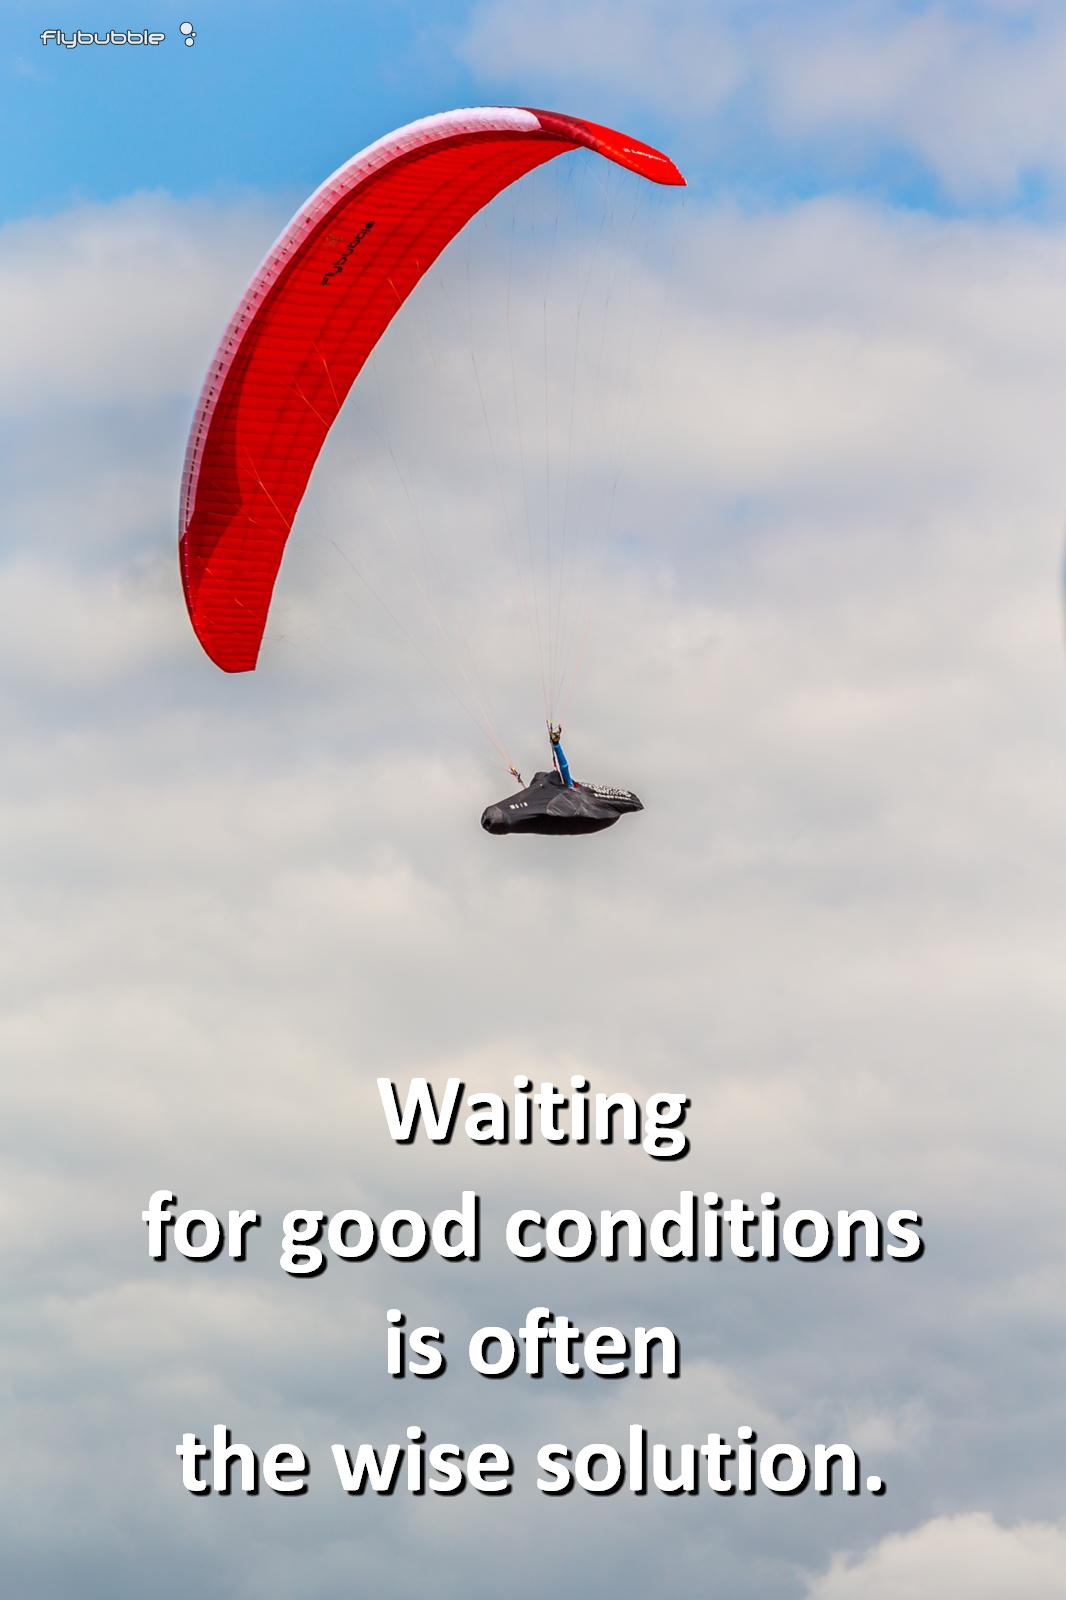 Waiting for good conditions is often the wise solution.